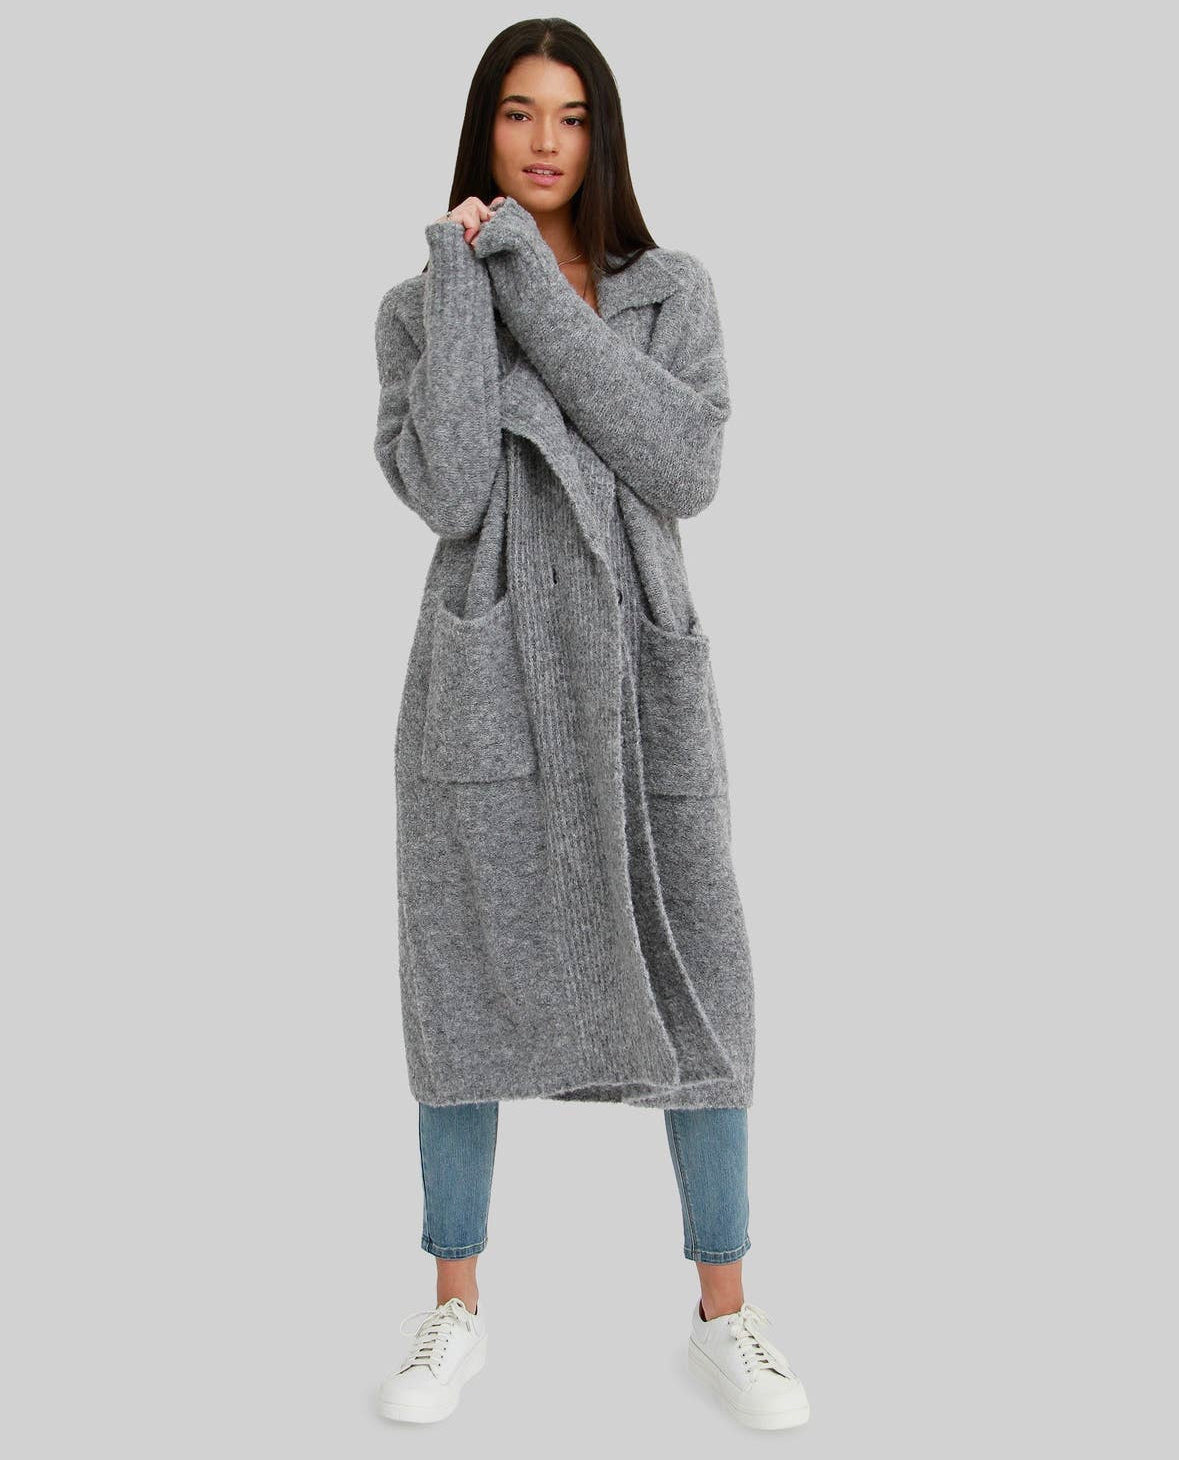 The Born to Run Sweater Coat, a conscious coatigan in a cozy gray knit, blending functionality with fabulous style.